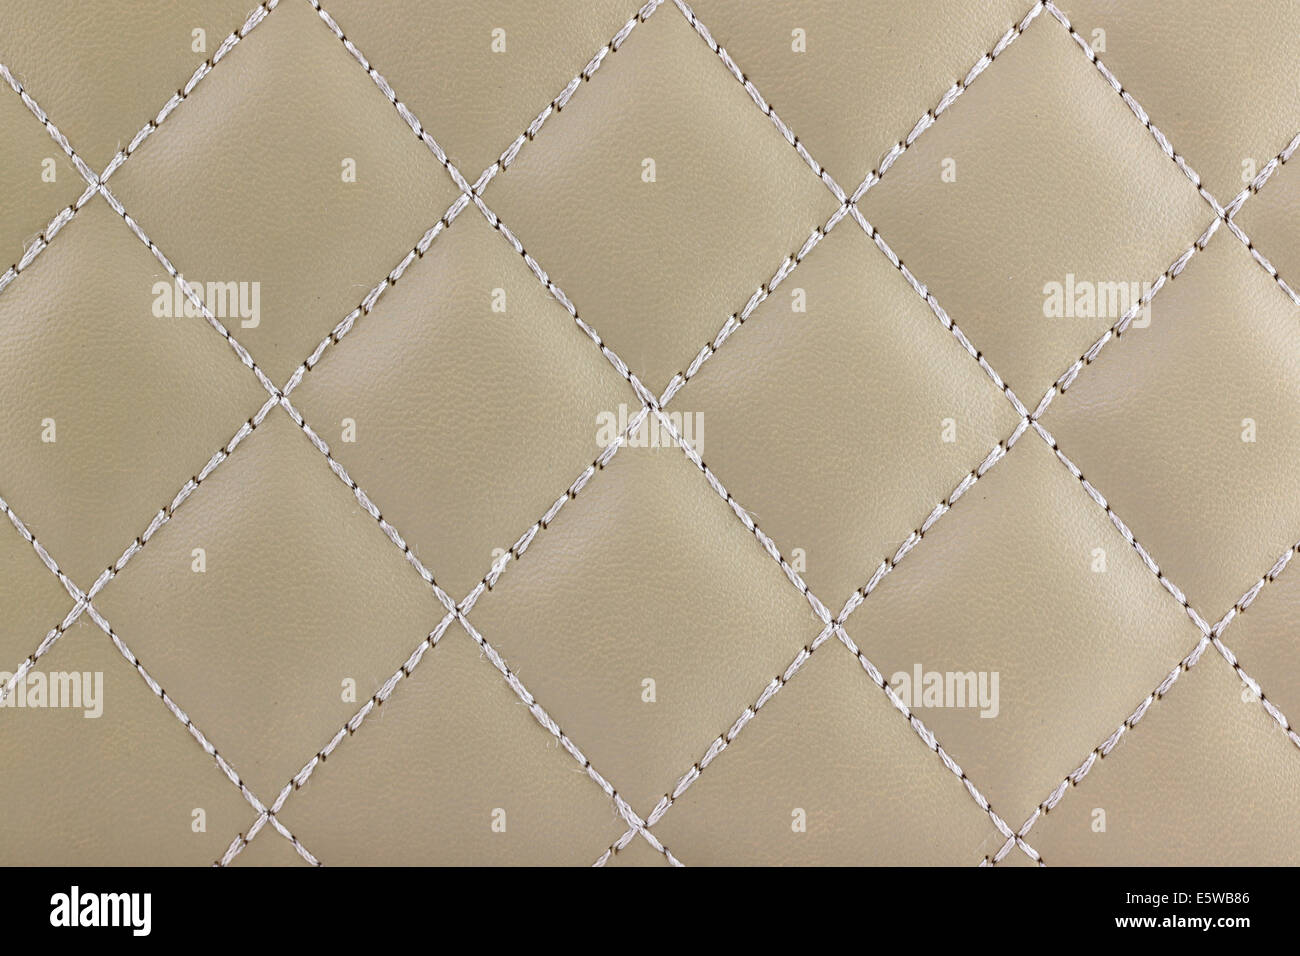 Textured and pattern of  light brown leather for the background. Stock Photo